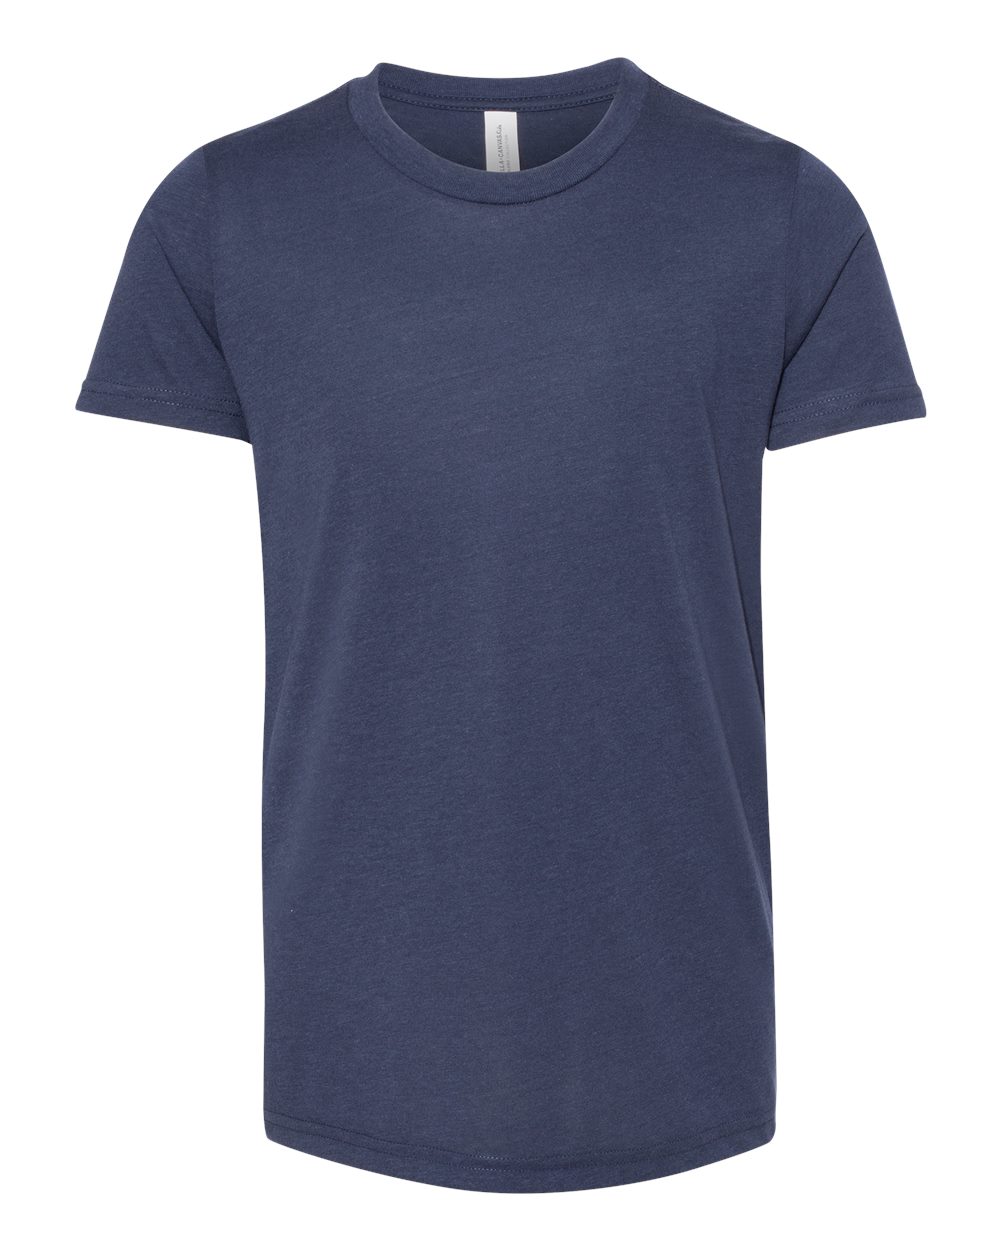 click to view Solid Navy Triblend